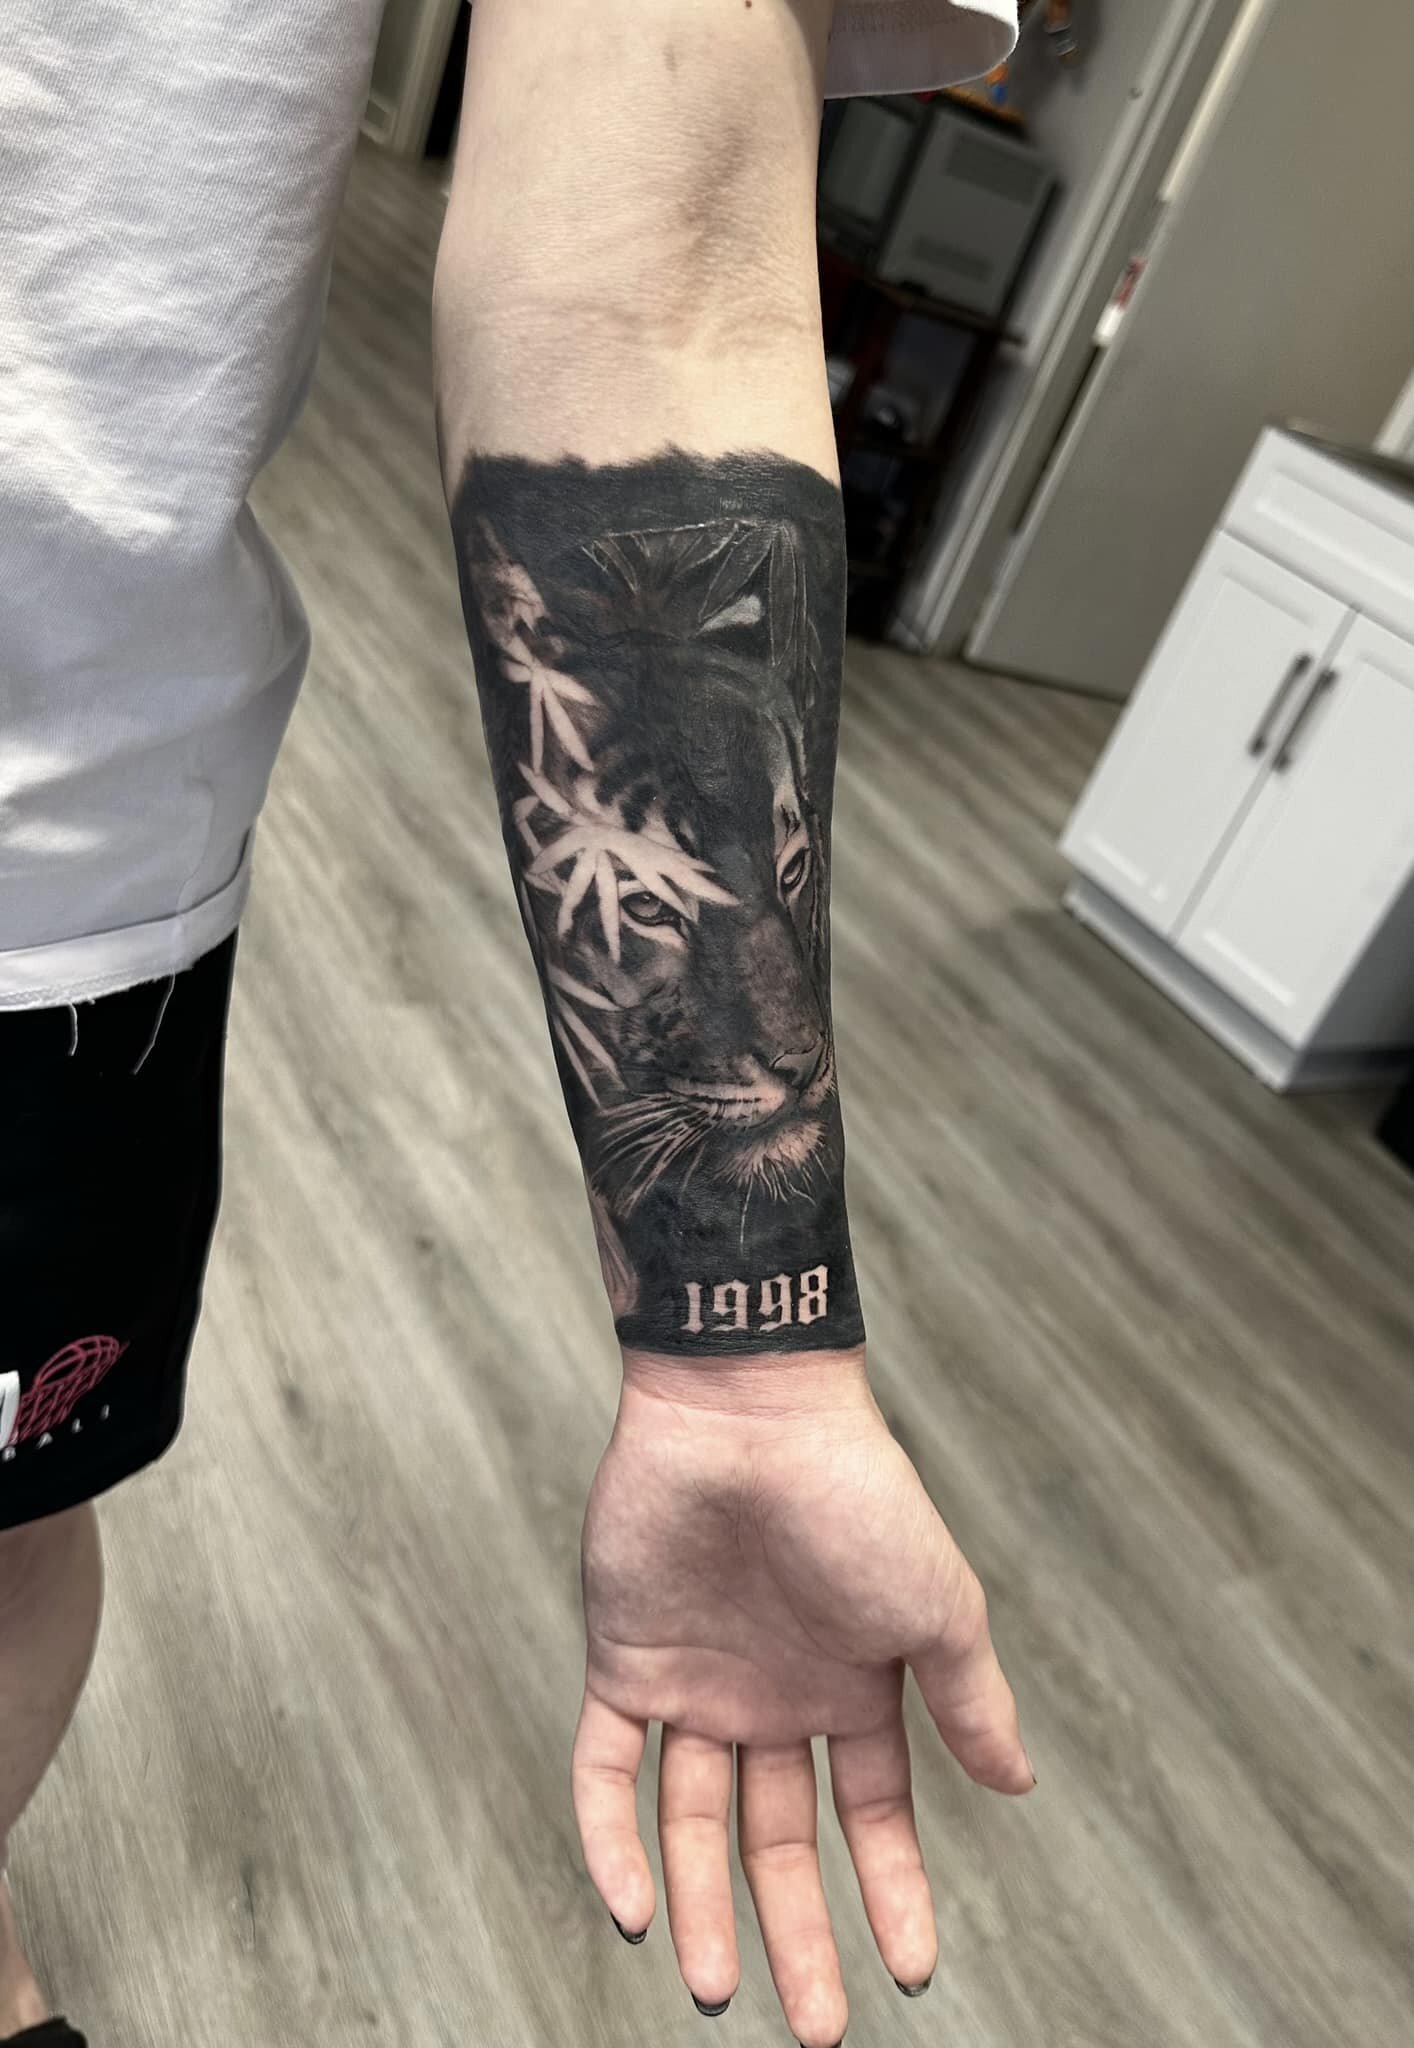 Tiger cover up tattoo. Done in 9 hours. 

#tigertattoo #tattooartist #tattoo #tattooflash #realismtattoo #tattoomachineshader #brotherhoodtattoo 

Old tattoo in comment